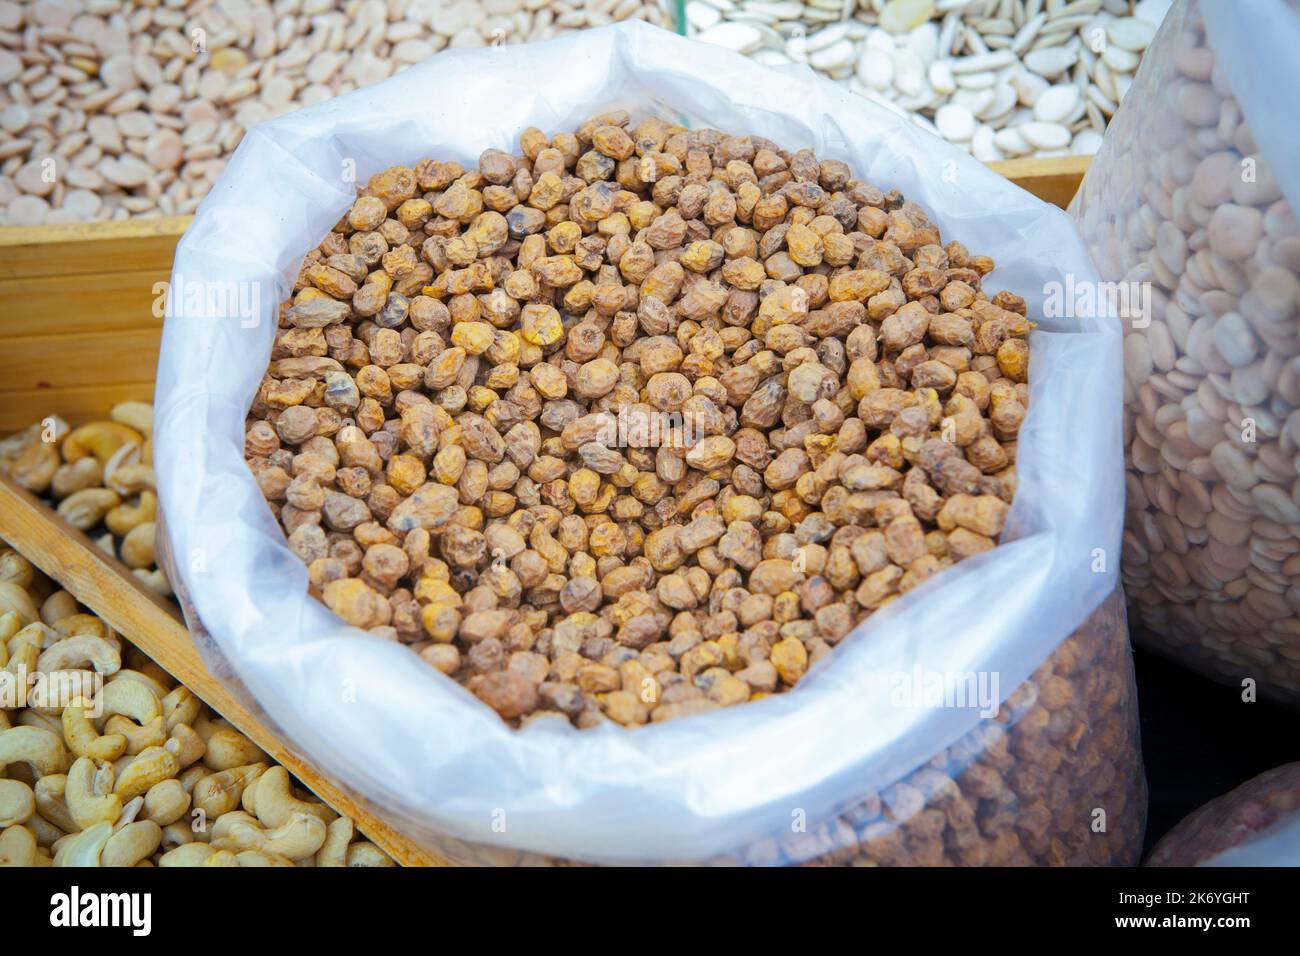 Rolled up sack full of tiger nuts or chufas. Displayed at street market stall Stock Photo